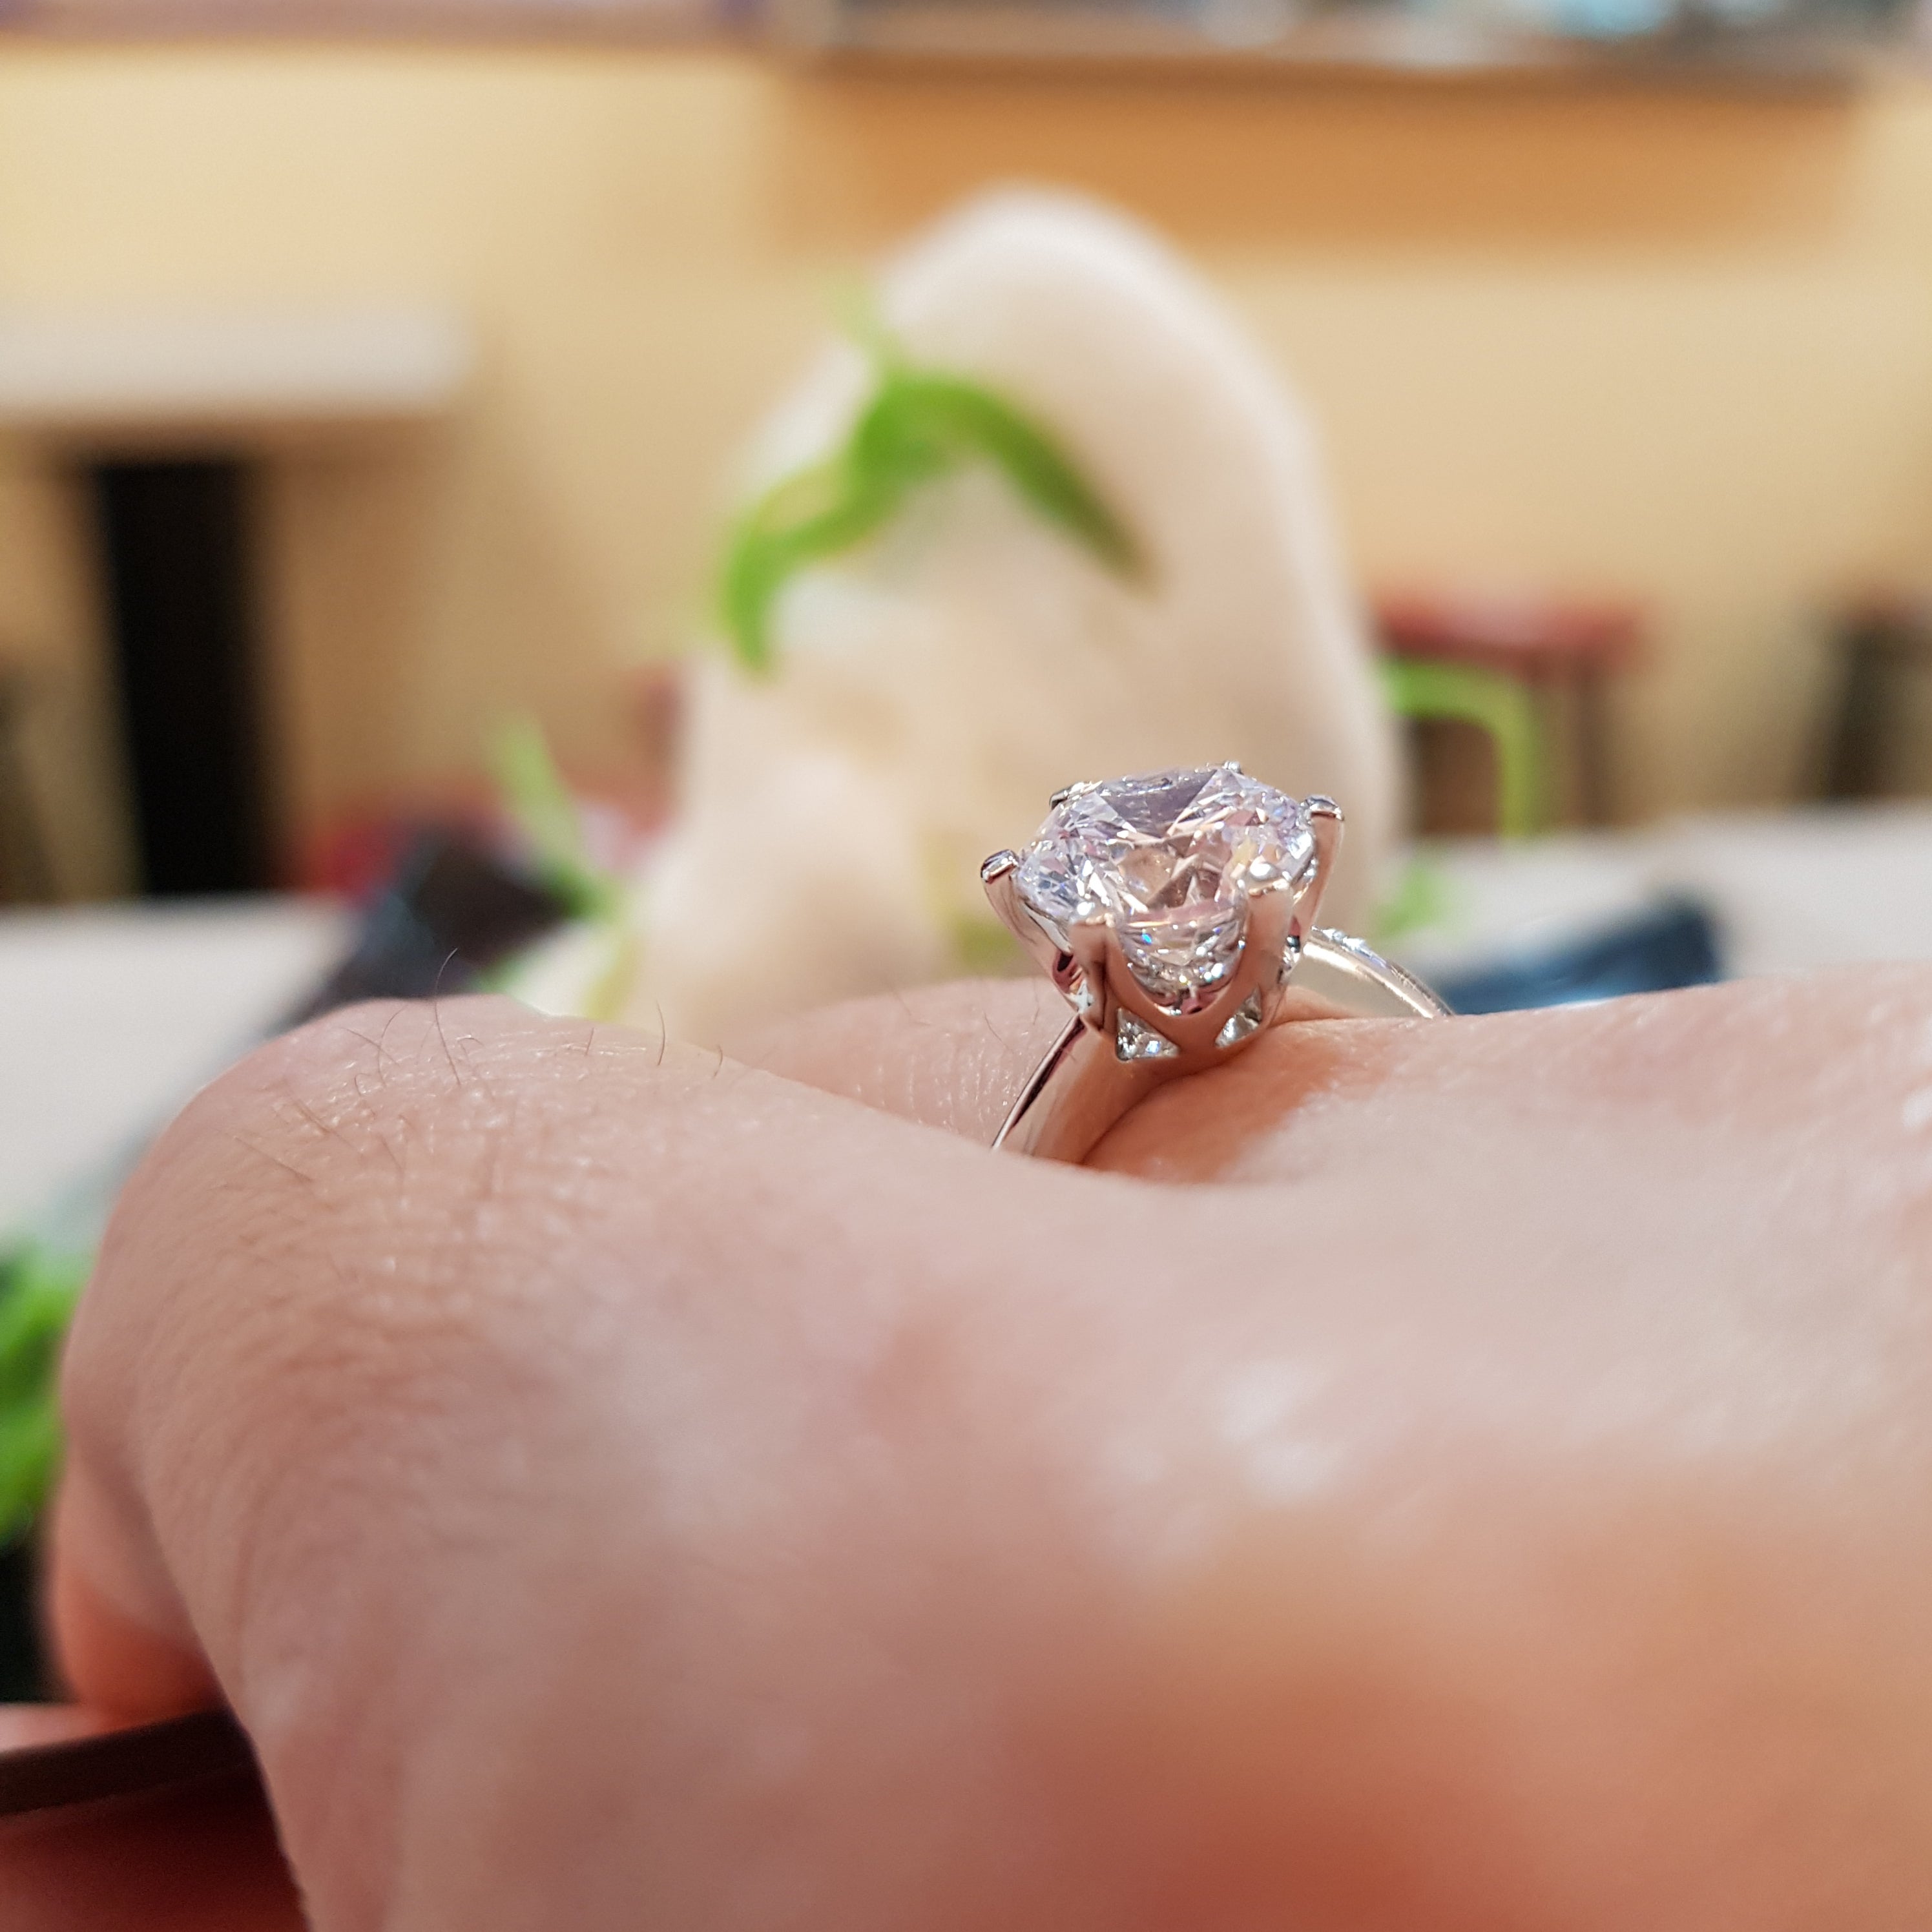 2.00 carats Solitaire Engagement Ring